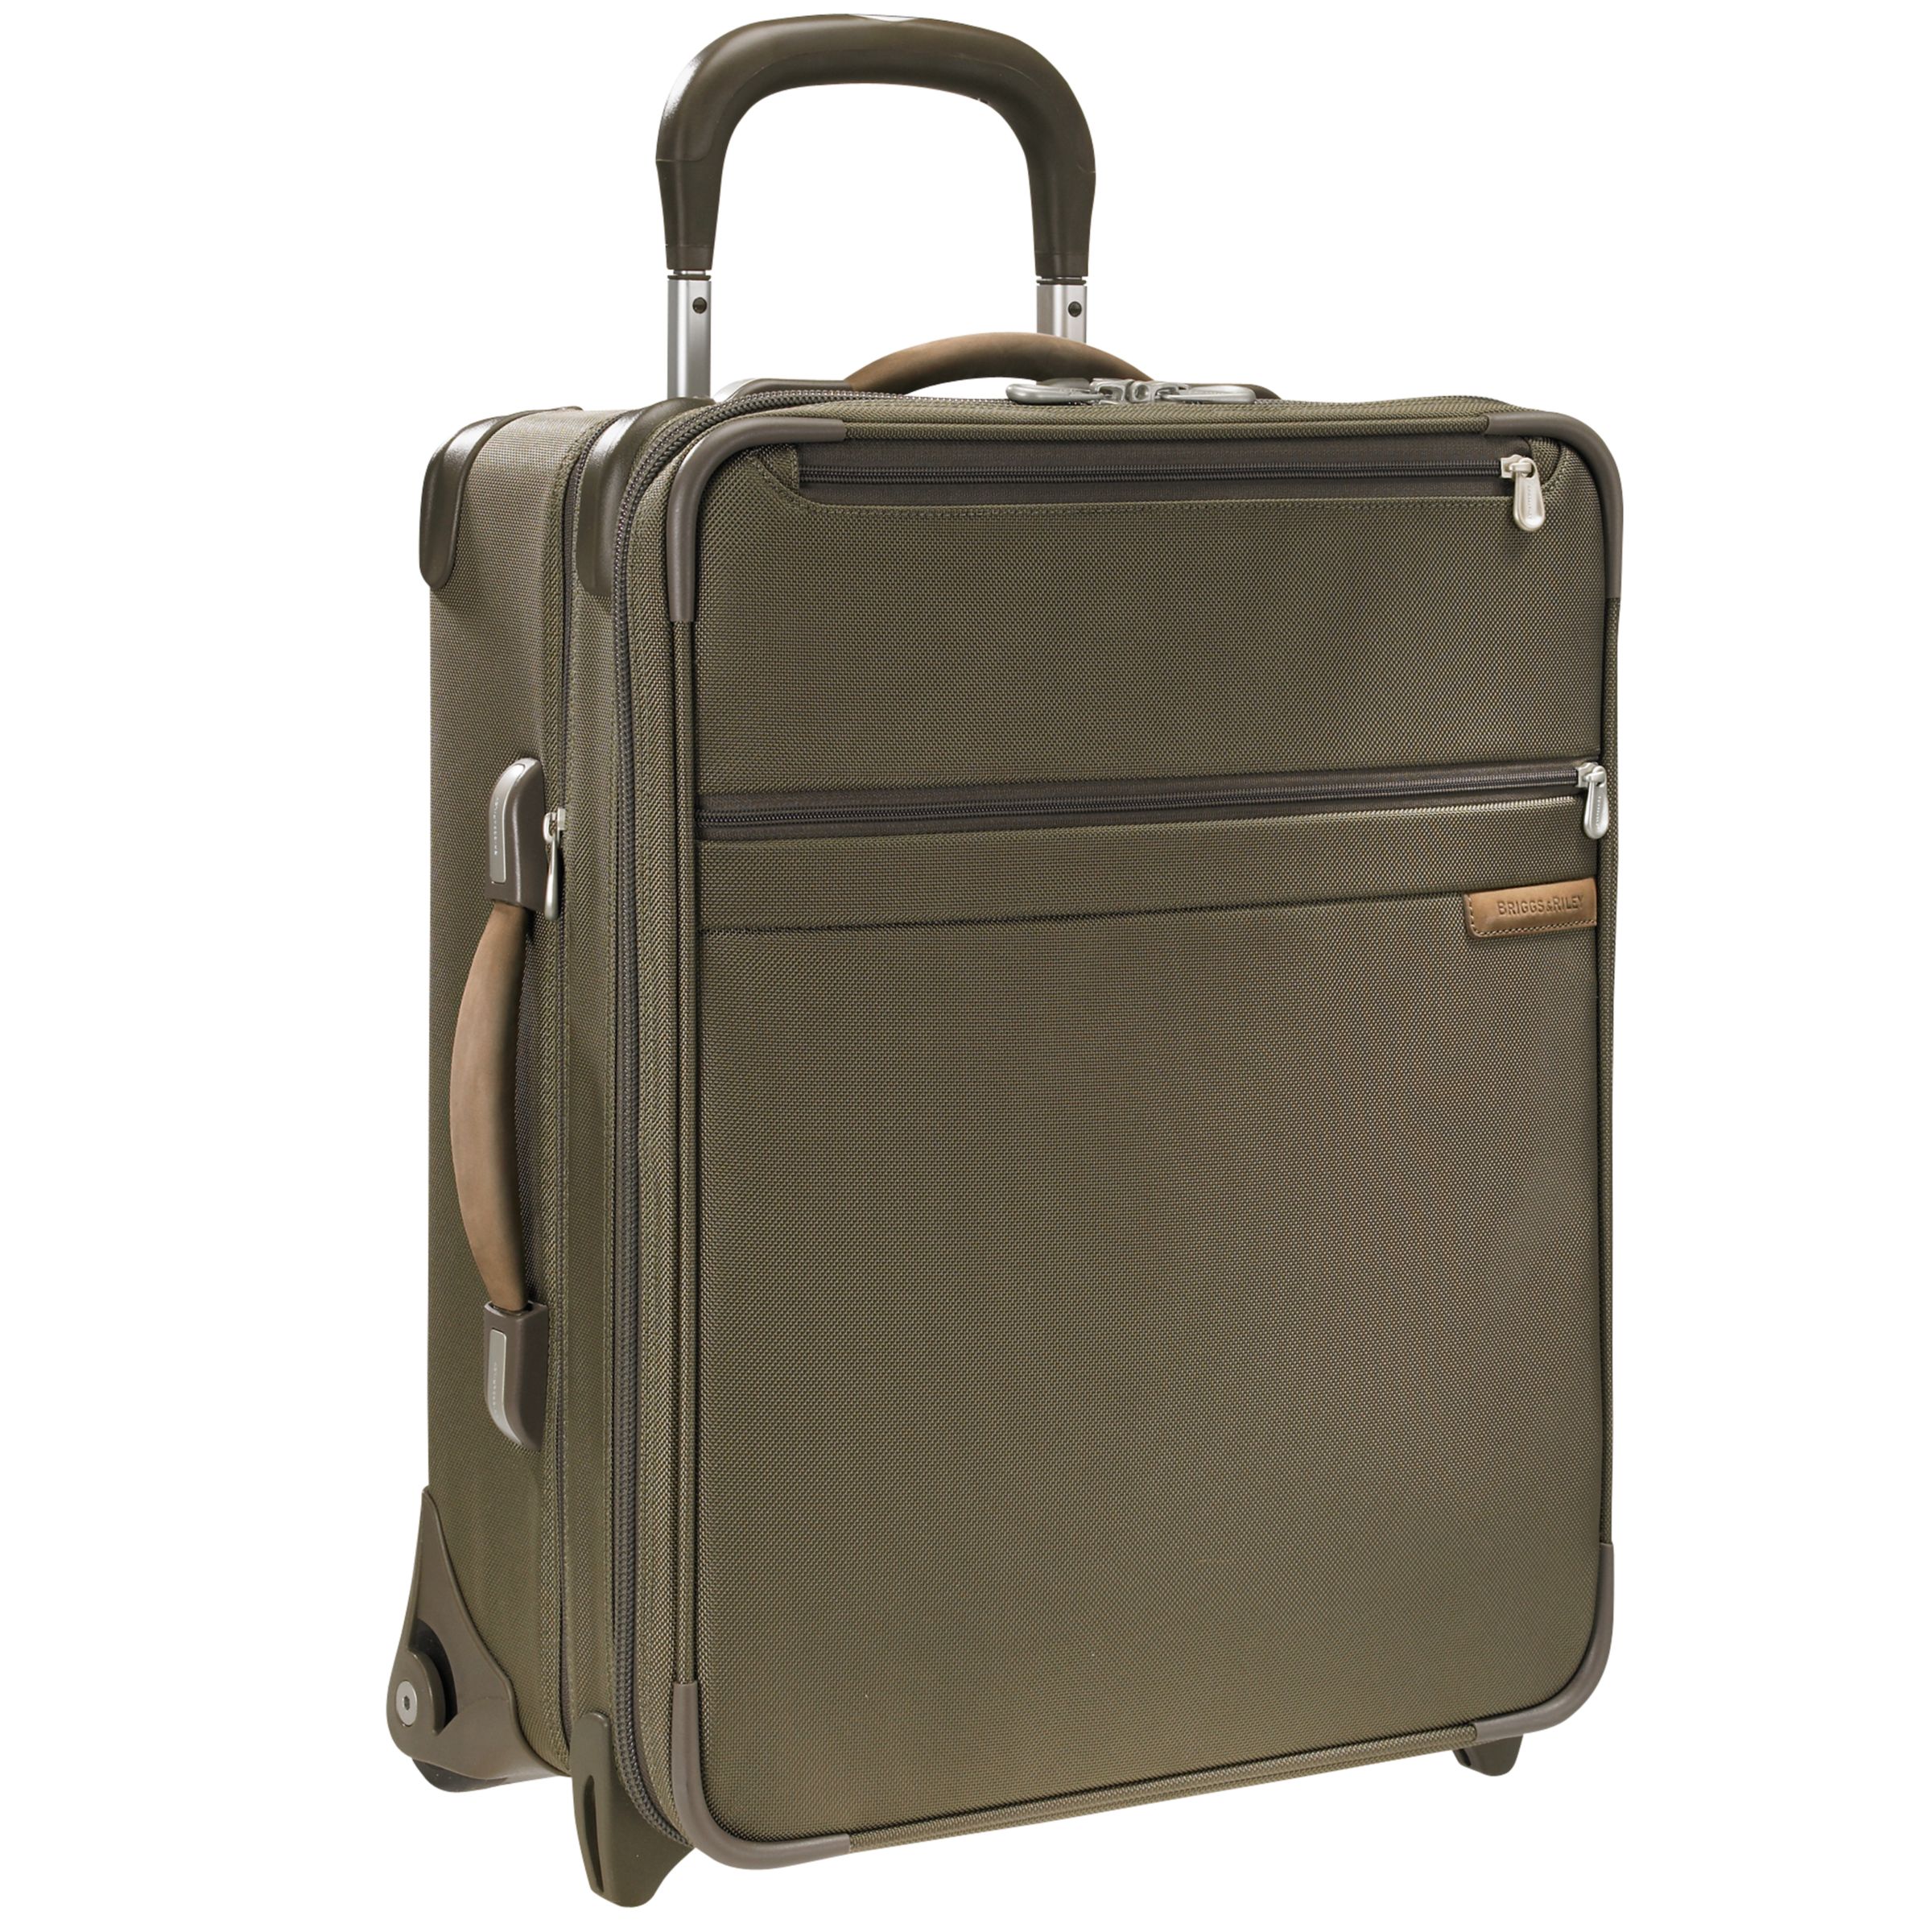 Briggs & Riley 20" Wide-Body Expandable Upright Cabin Bag, Olive at John Lewis